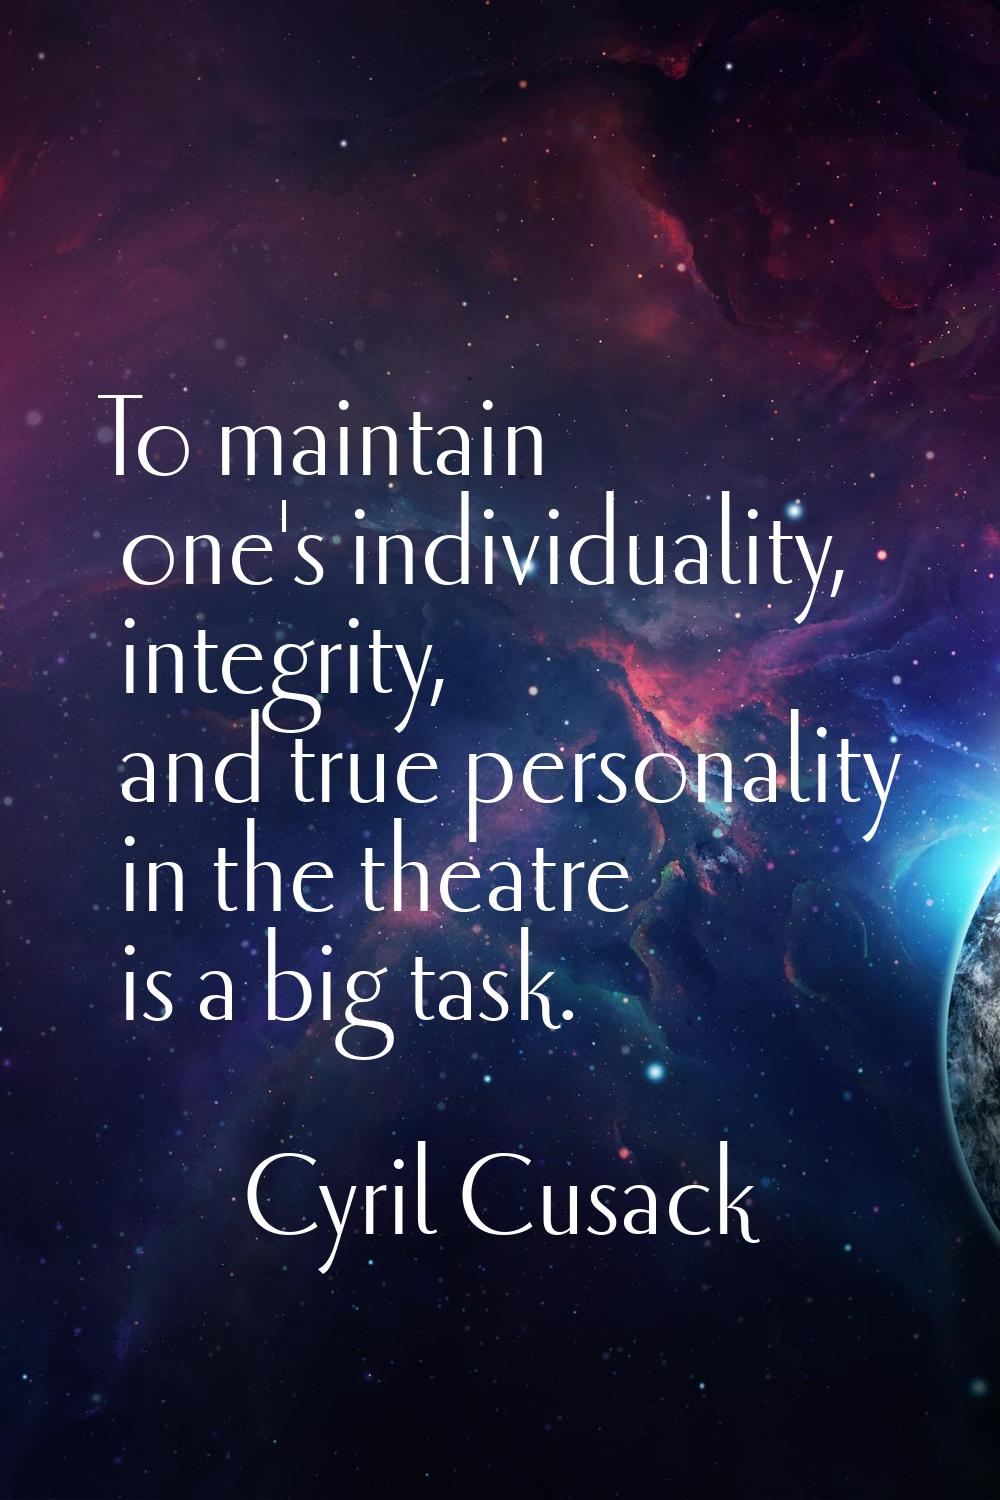 To maintain one's individuality, integrity, and true personality in the theatre is a big task.